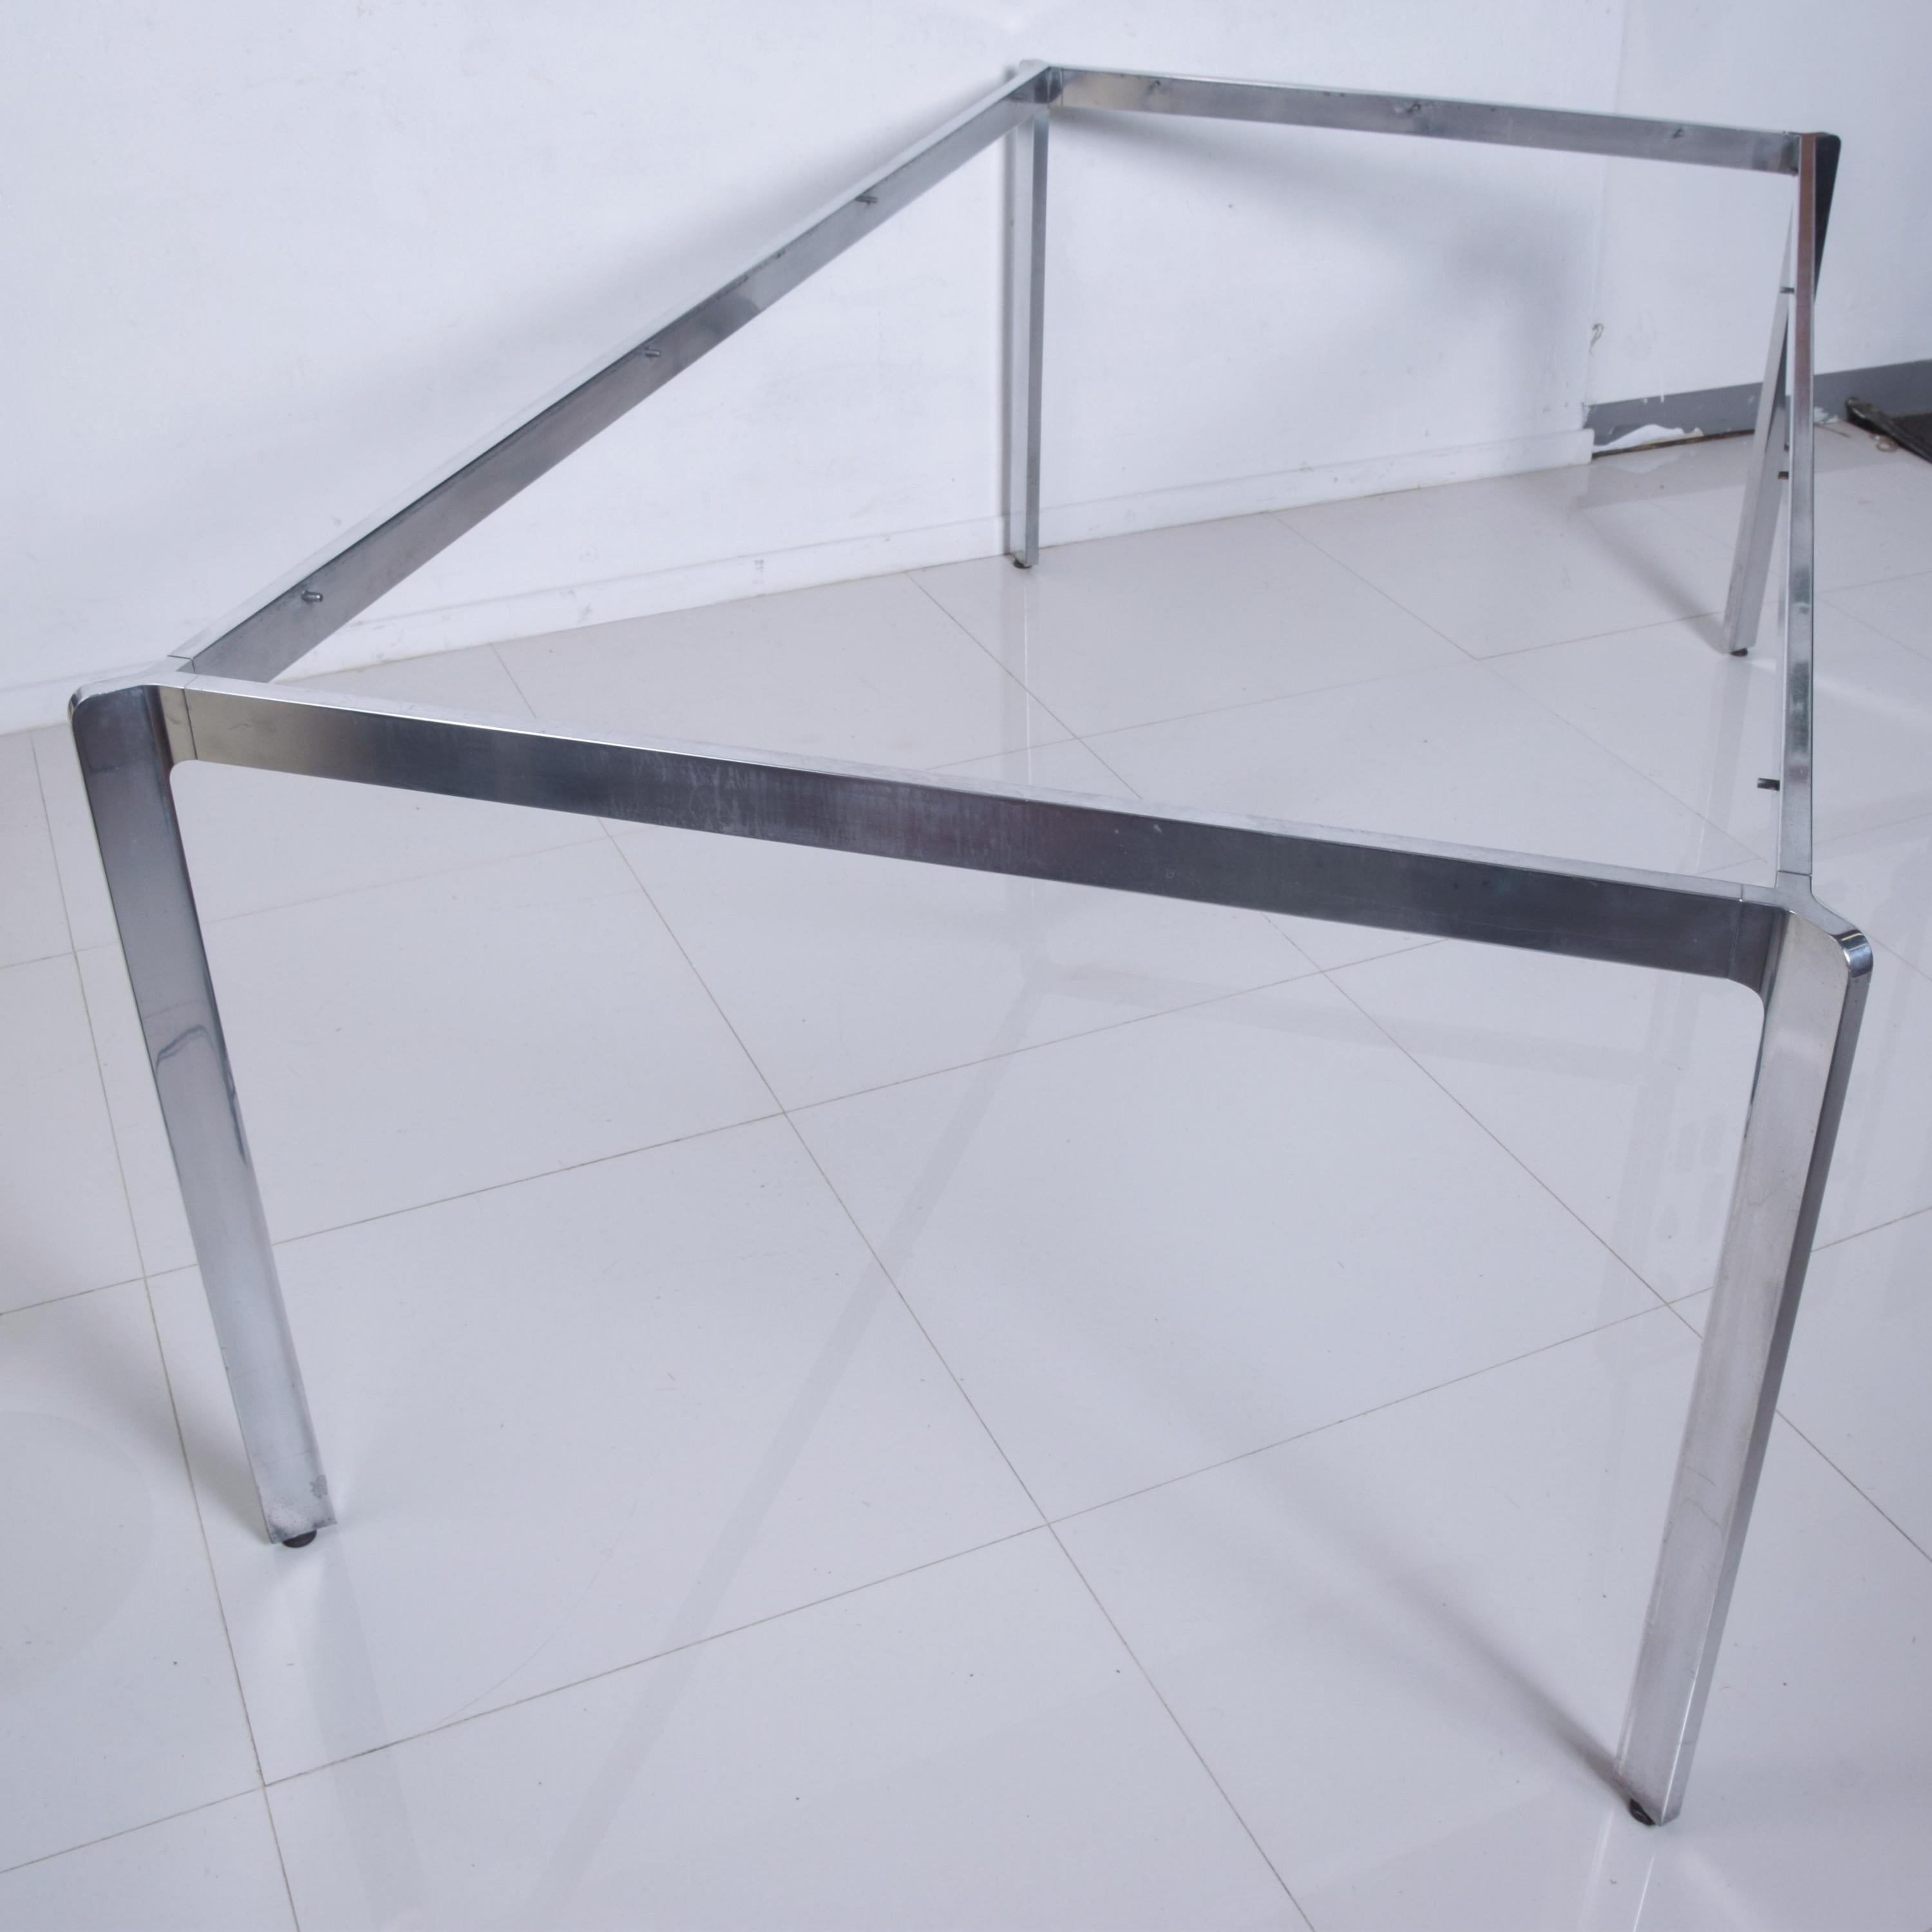 Dining Table
Milo Baughman French Glass Dining Table Angular Polished Aluminum Base Tempered Glass circa 1970
Unmarked
Measures: 42 x 80 x 28 1/2  Glass 37 3/4 x 75 3/4 x 1/4
Original Unrestored Vintage Preowned Condition. Tempered glass shows